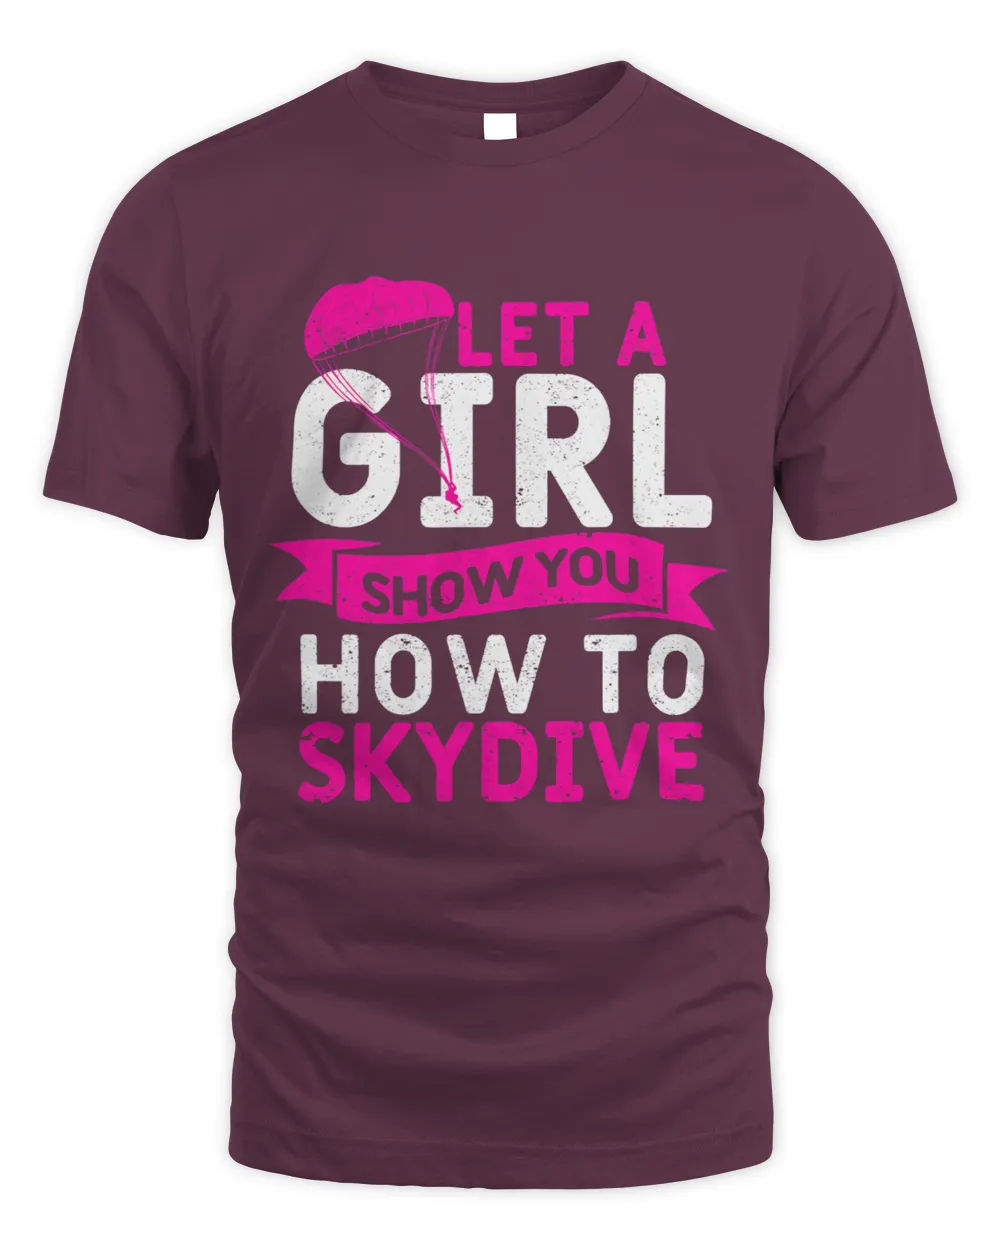 Skydiving Gift Girls Skydiver Sky Diving Let A Girl Show You How to Skydive